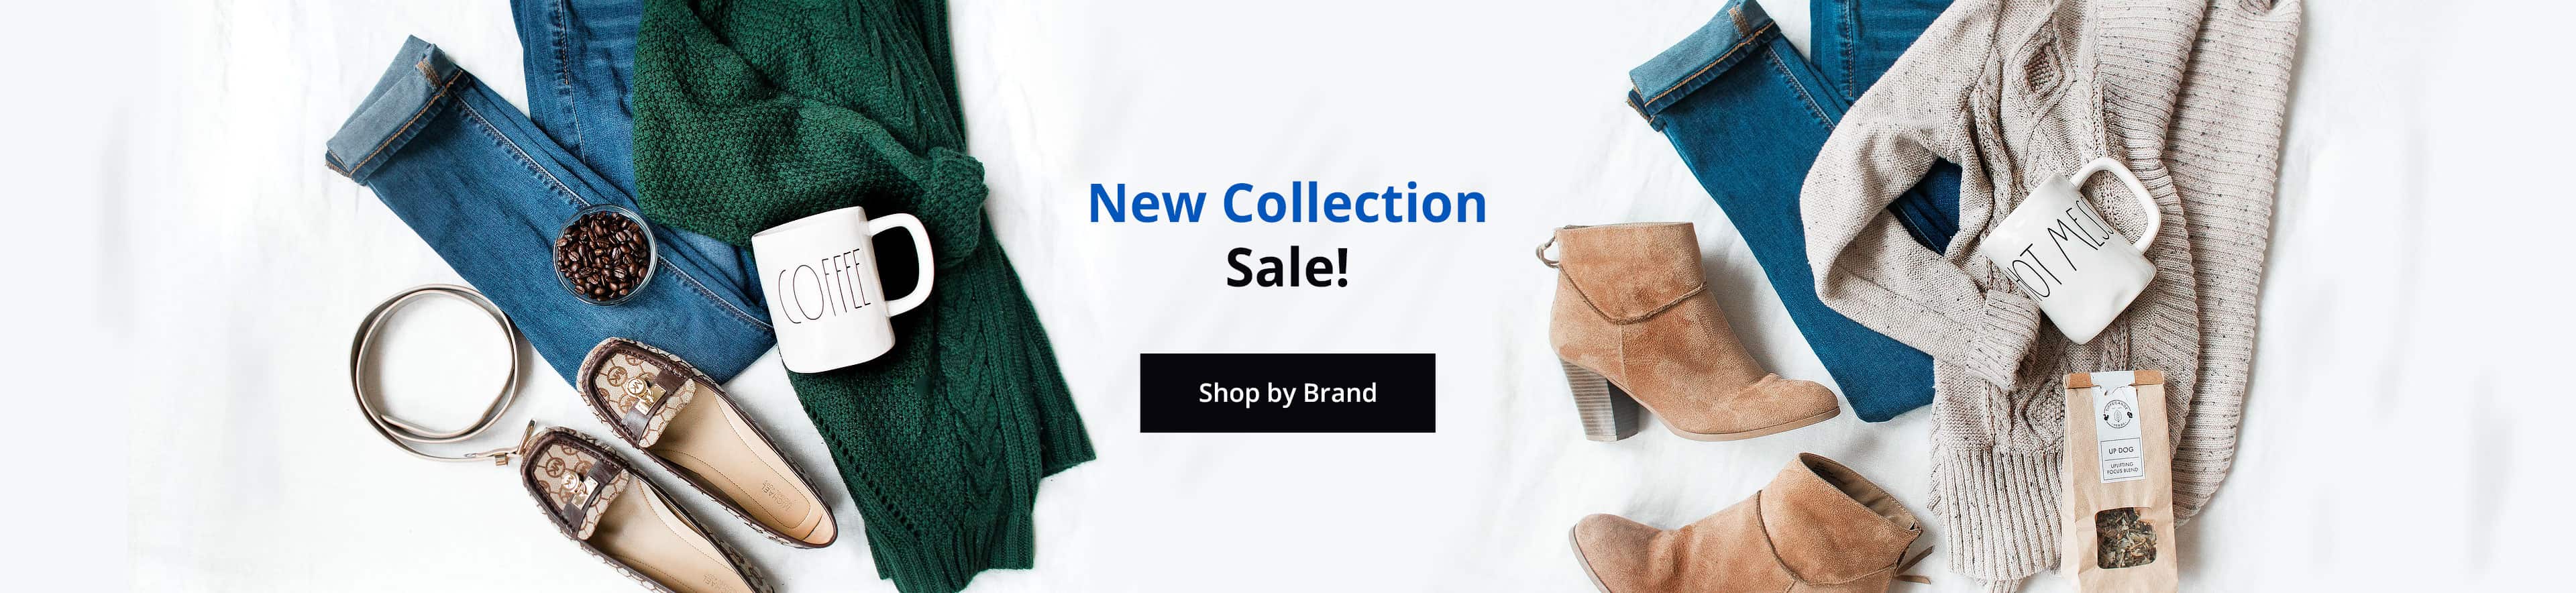 New collection Sale!